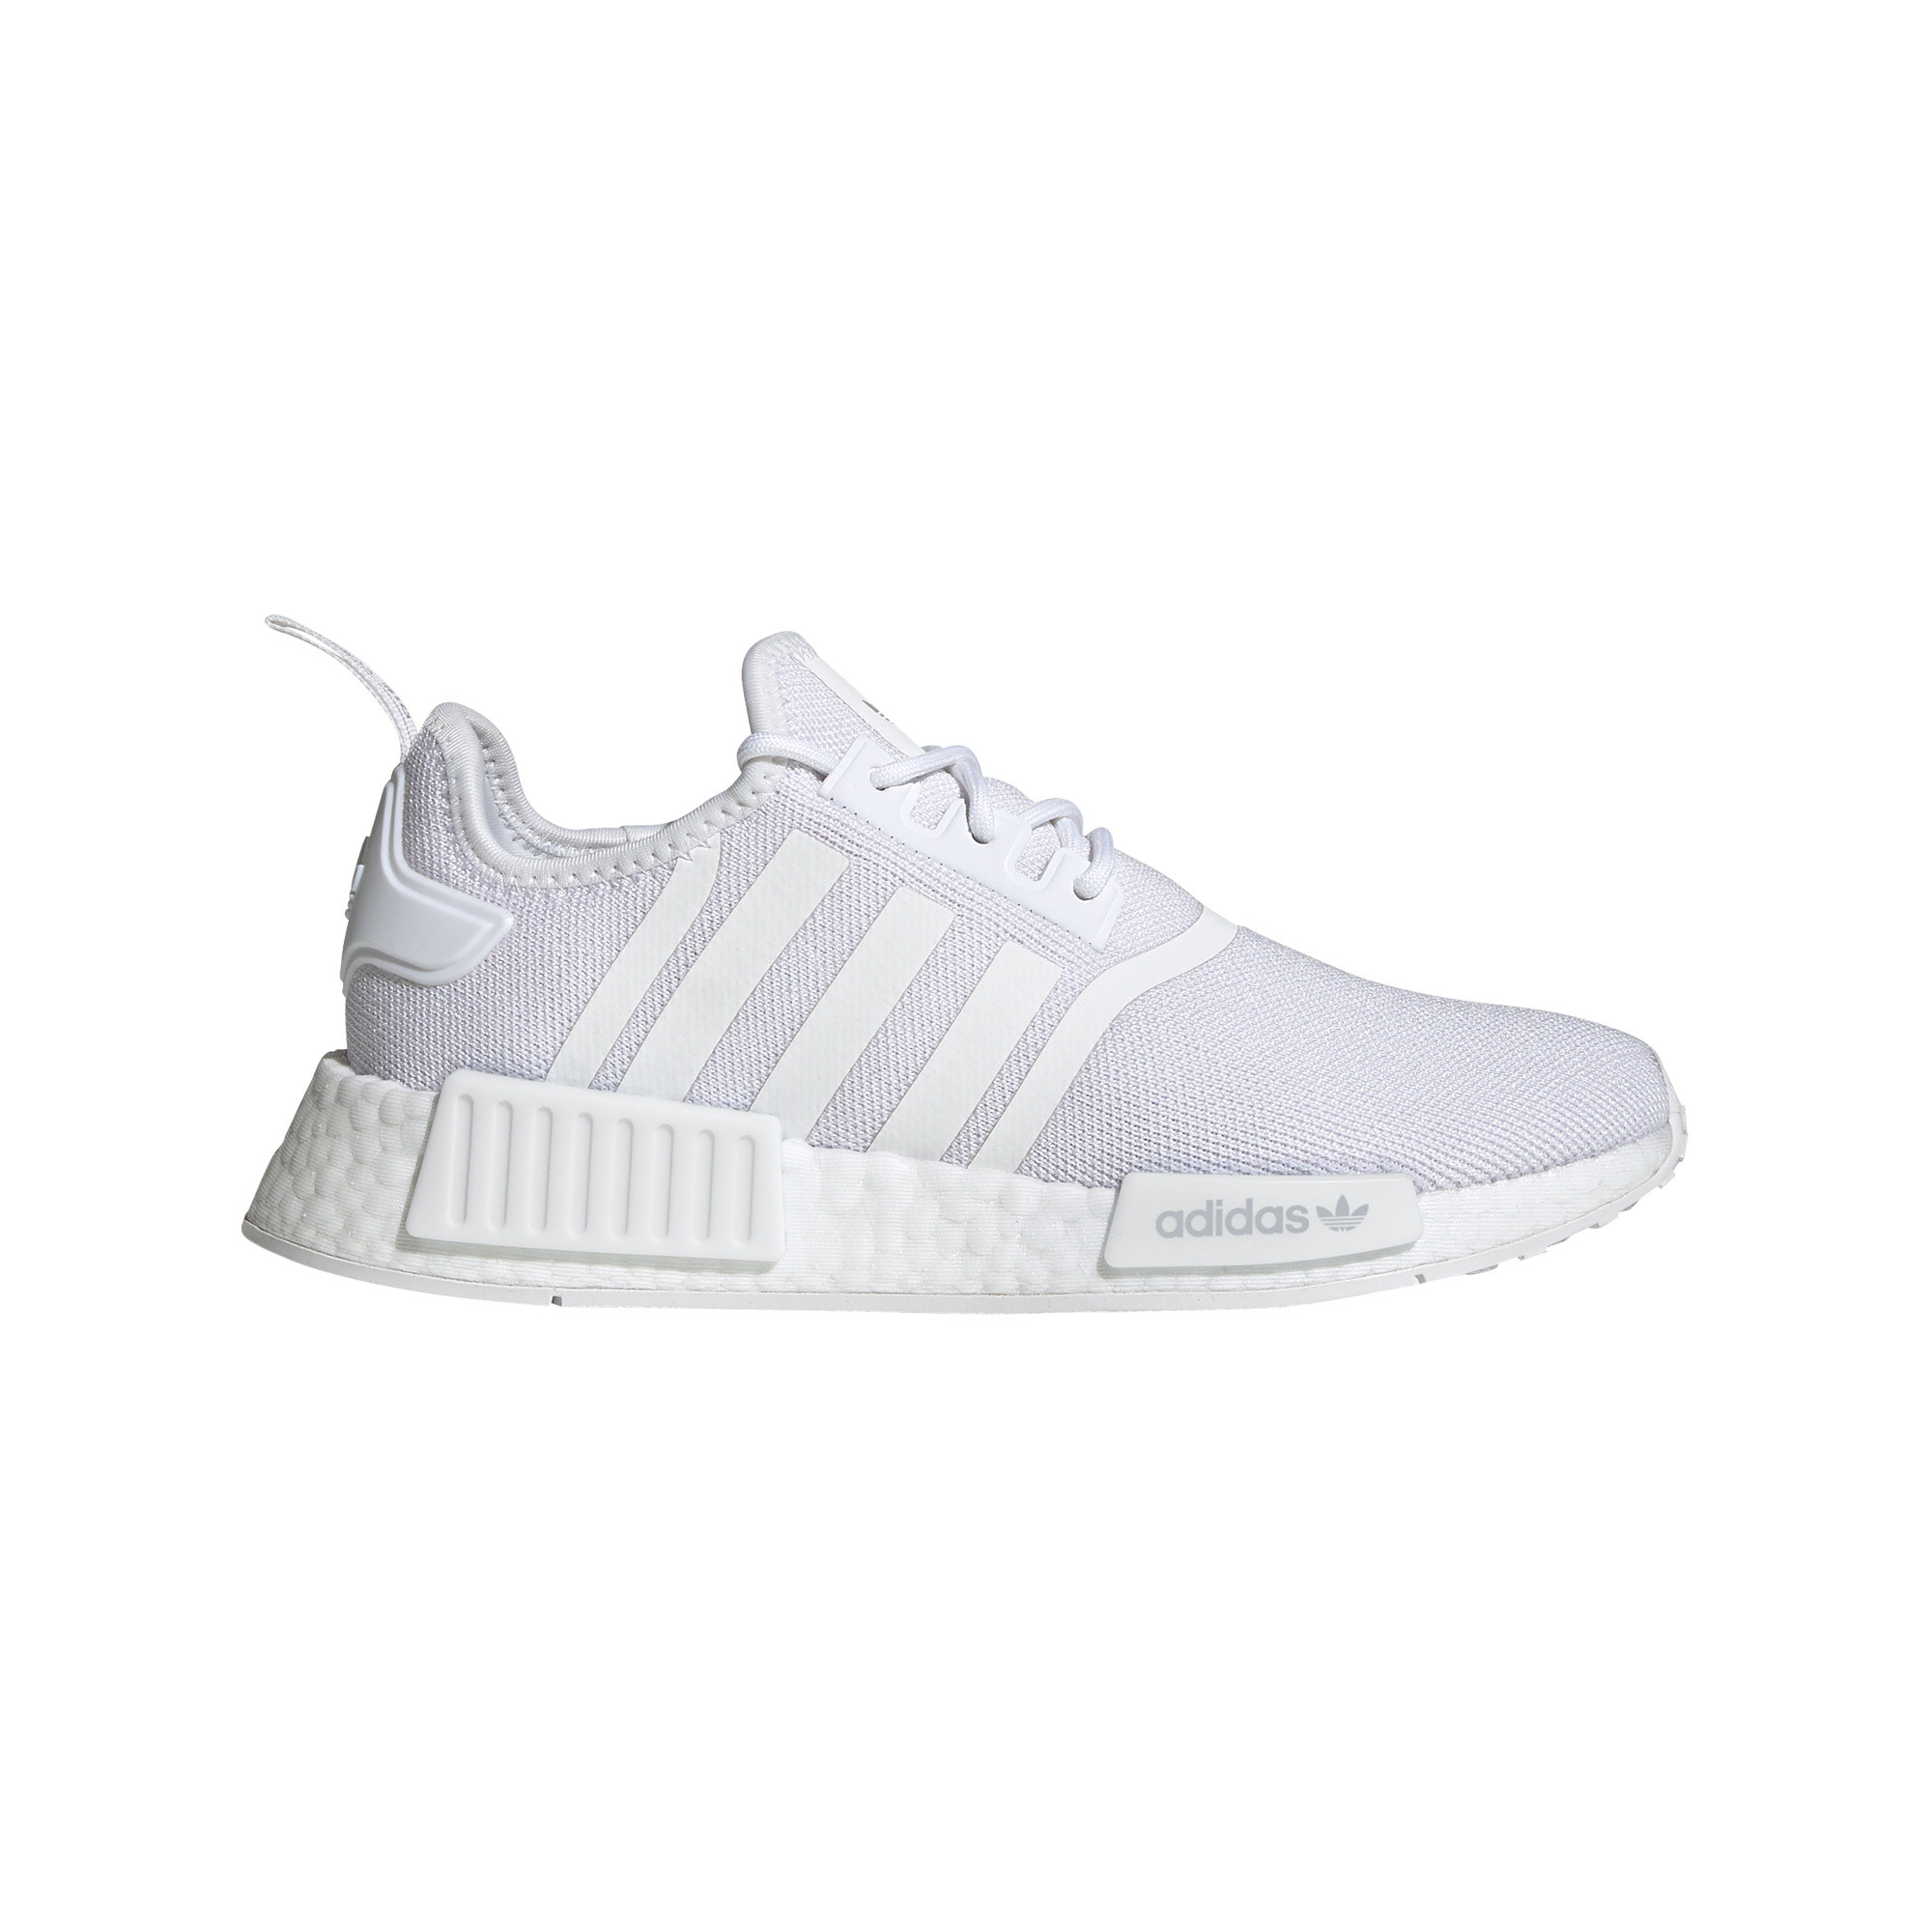 NMD_R1 Primeblue Shoes, White / Grey, large image number 8